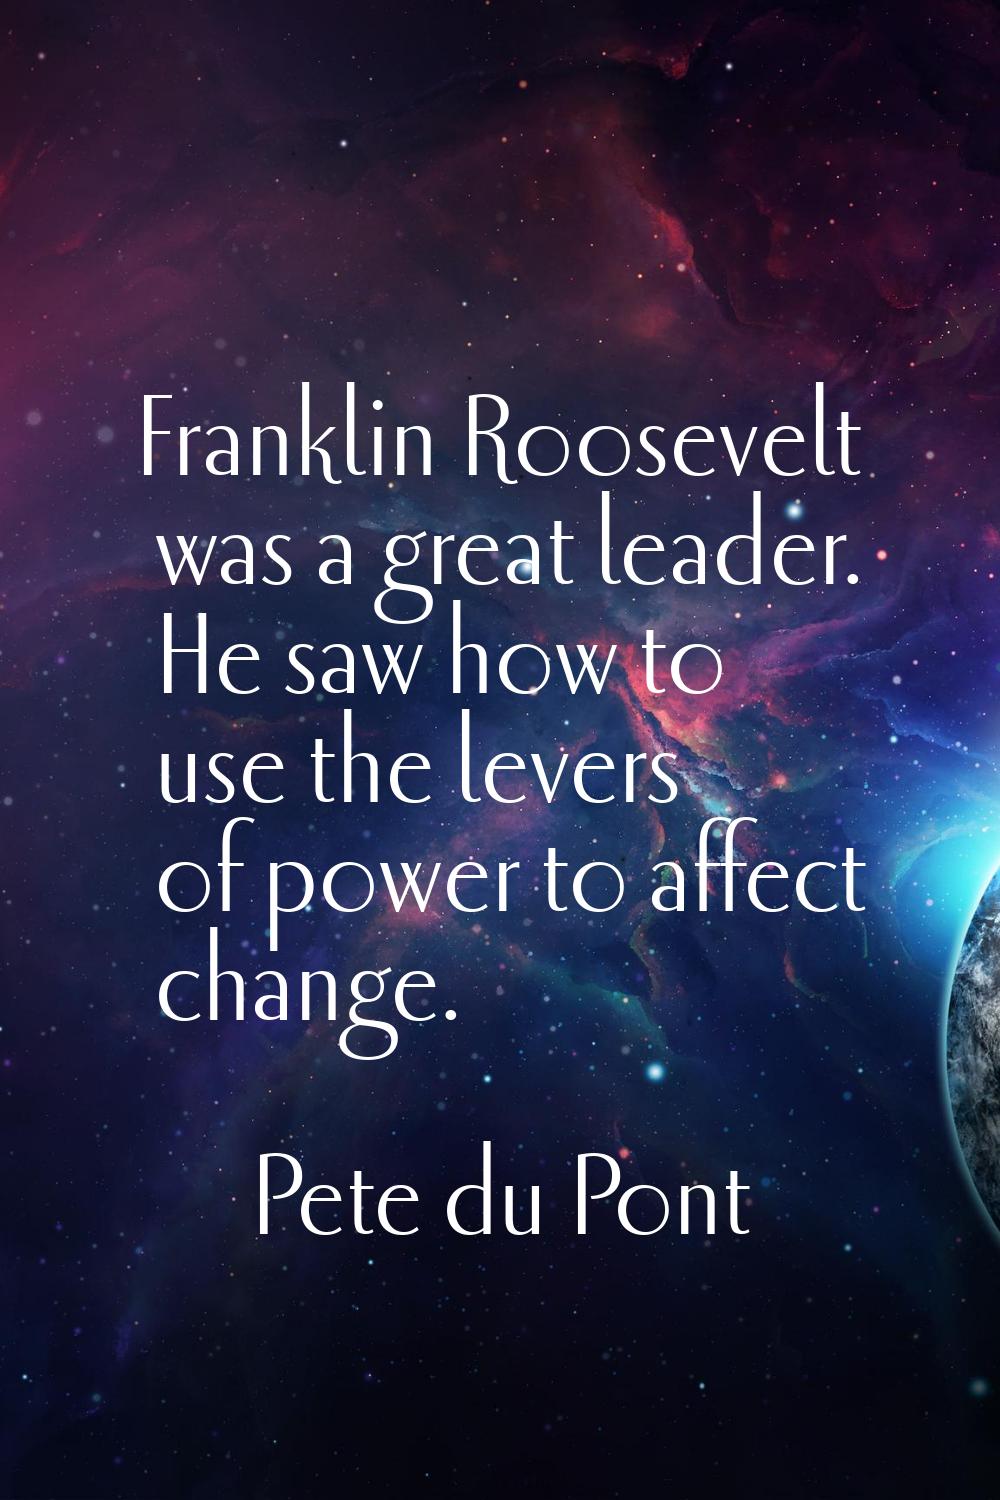 Franklin Roosevelt was a great leader. He saw how to use the levers of power to affect change.